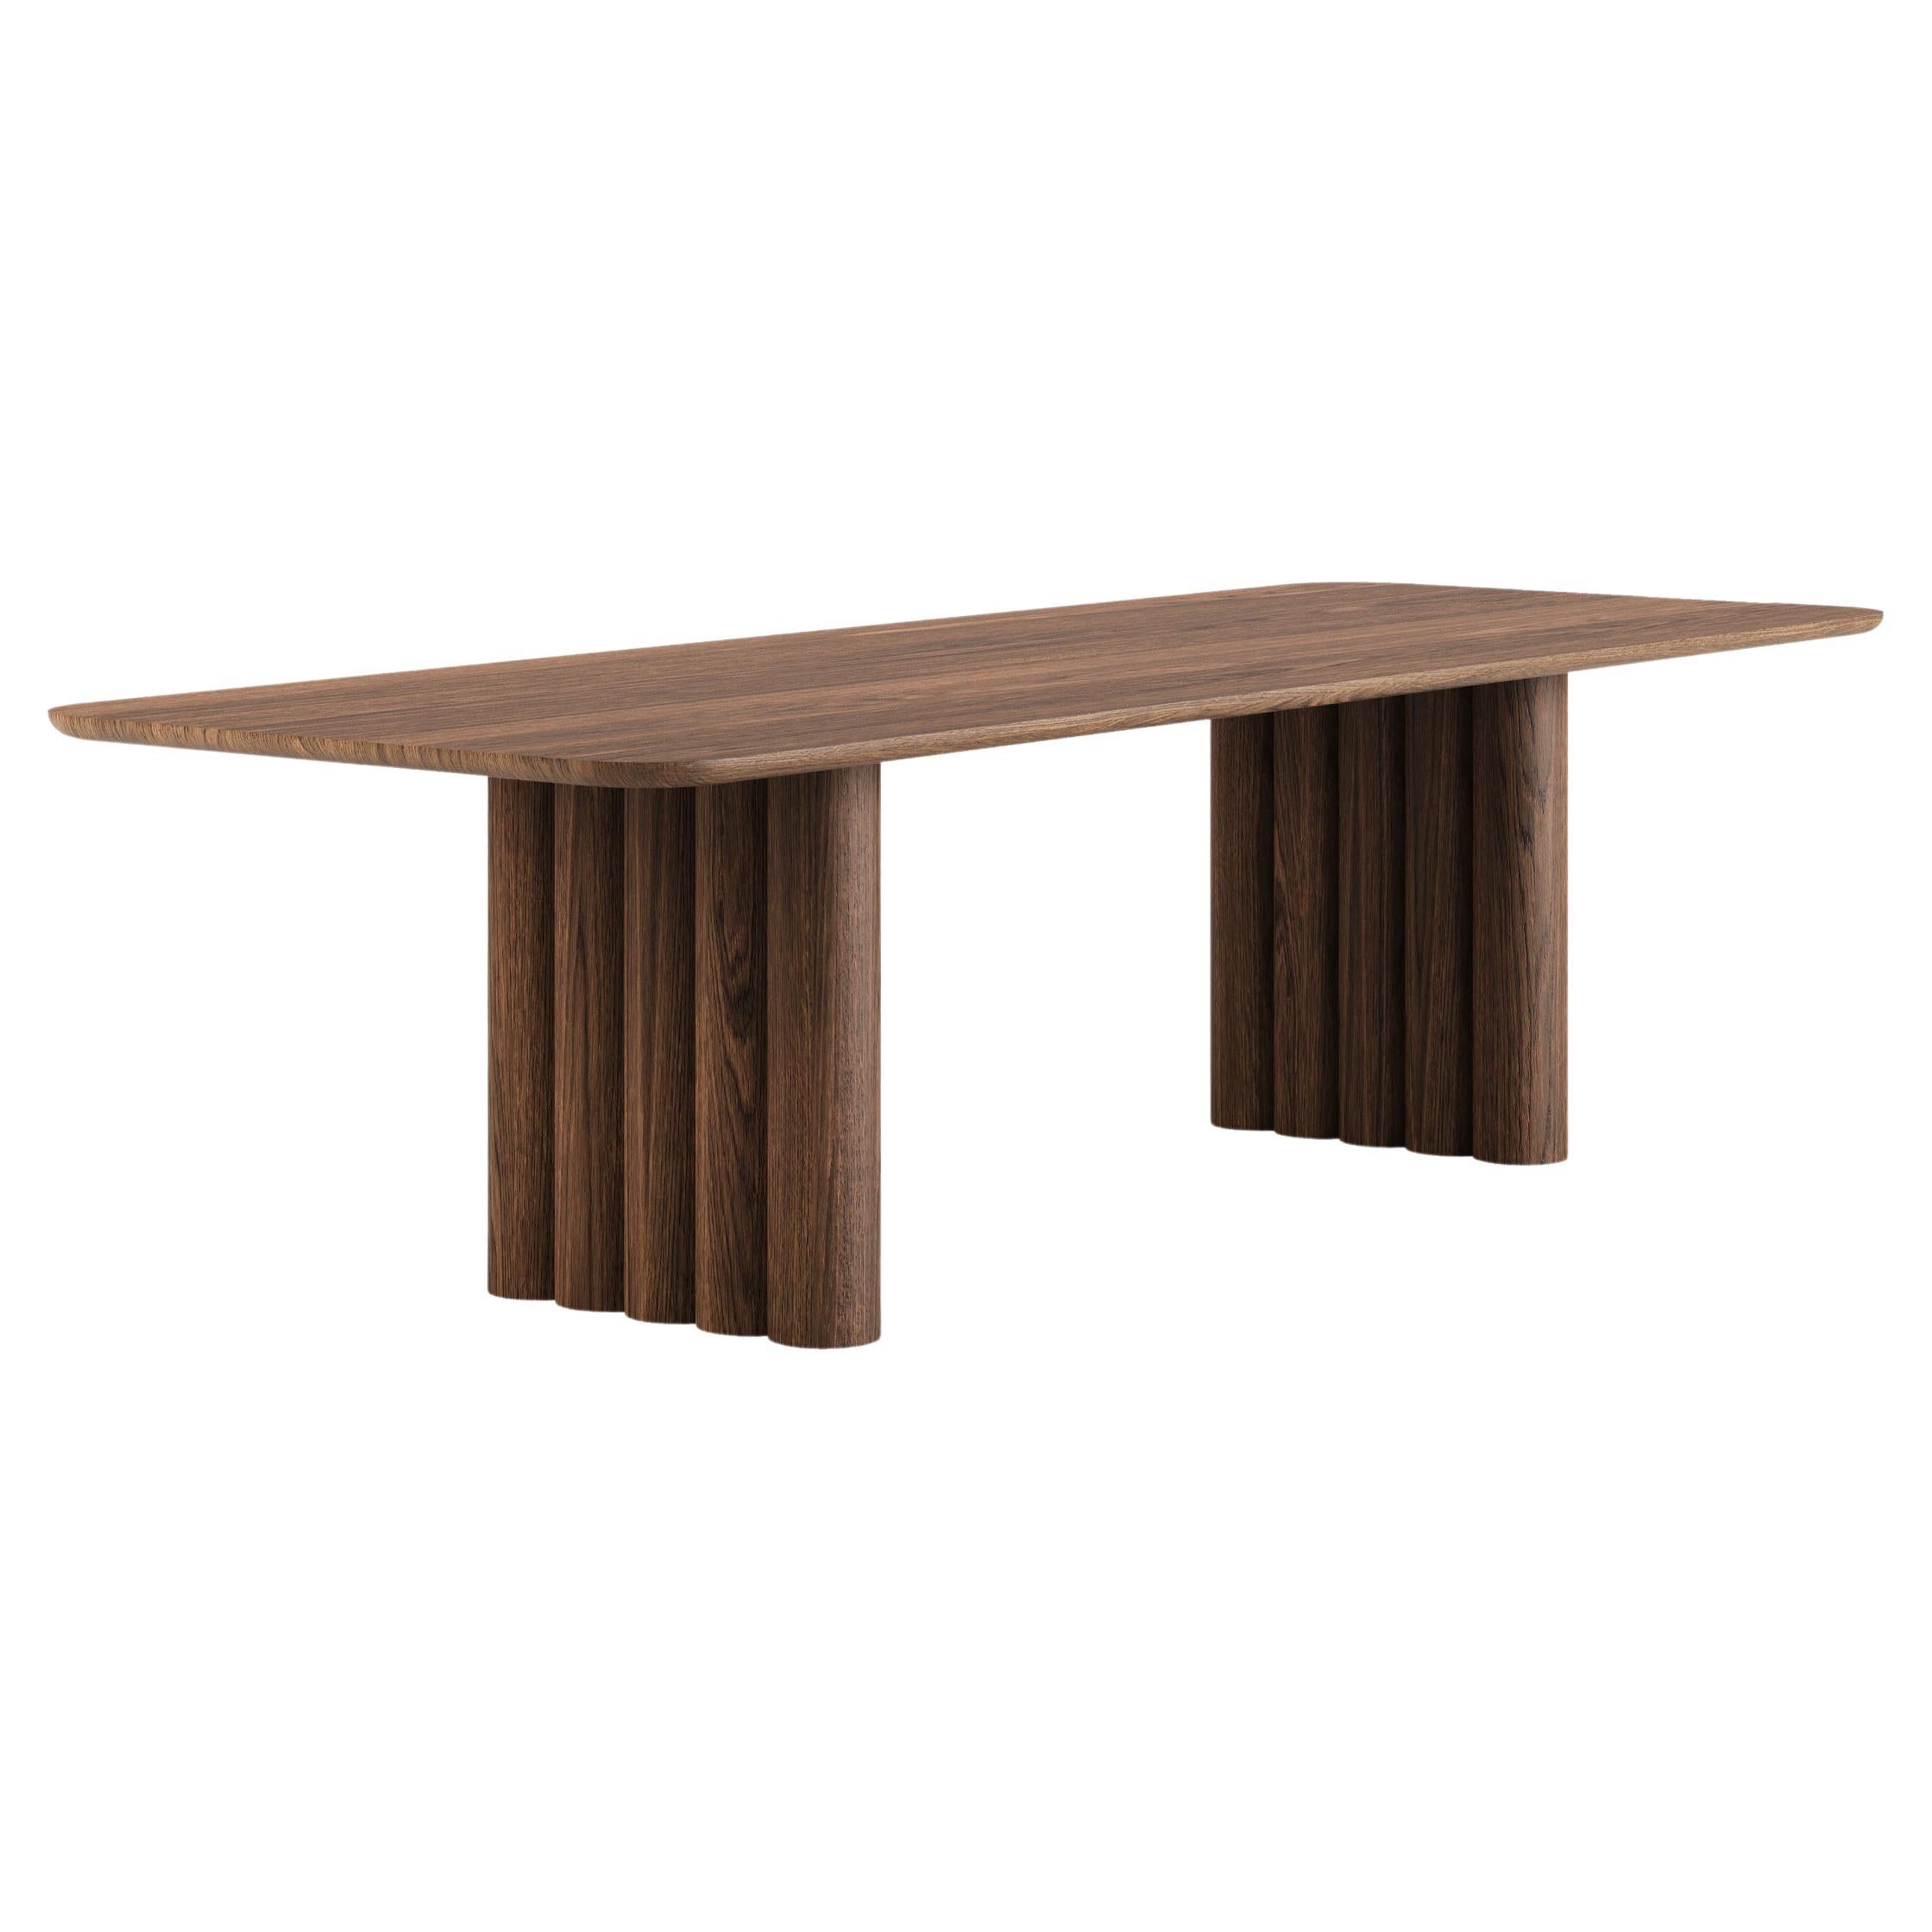 Contemporary Dining Table 'Plush' by Dk3, Smoked Oak or Walnut, 270, Rectangular